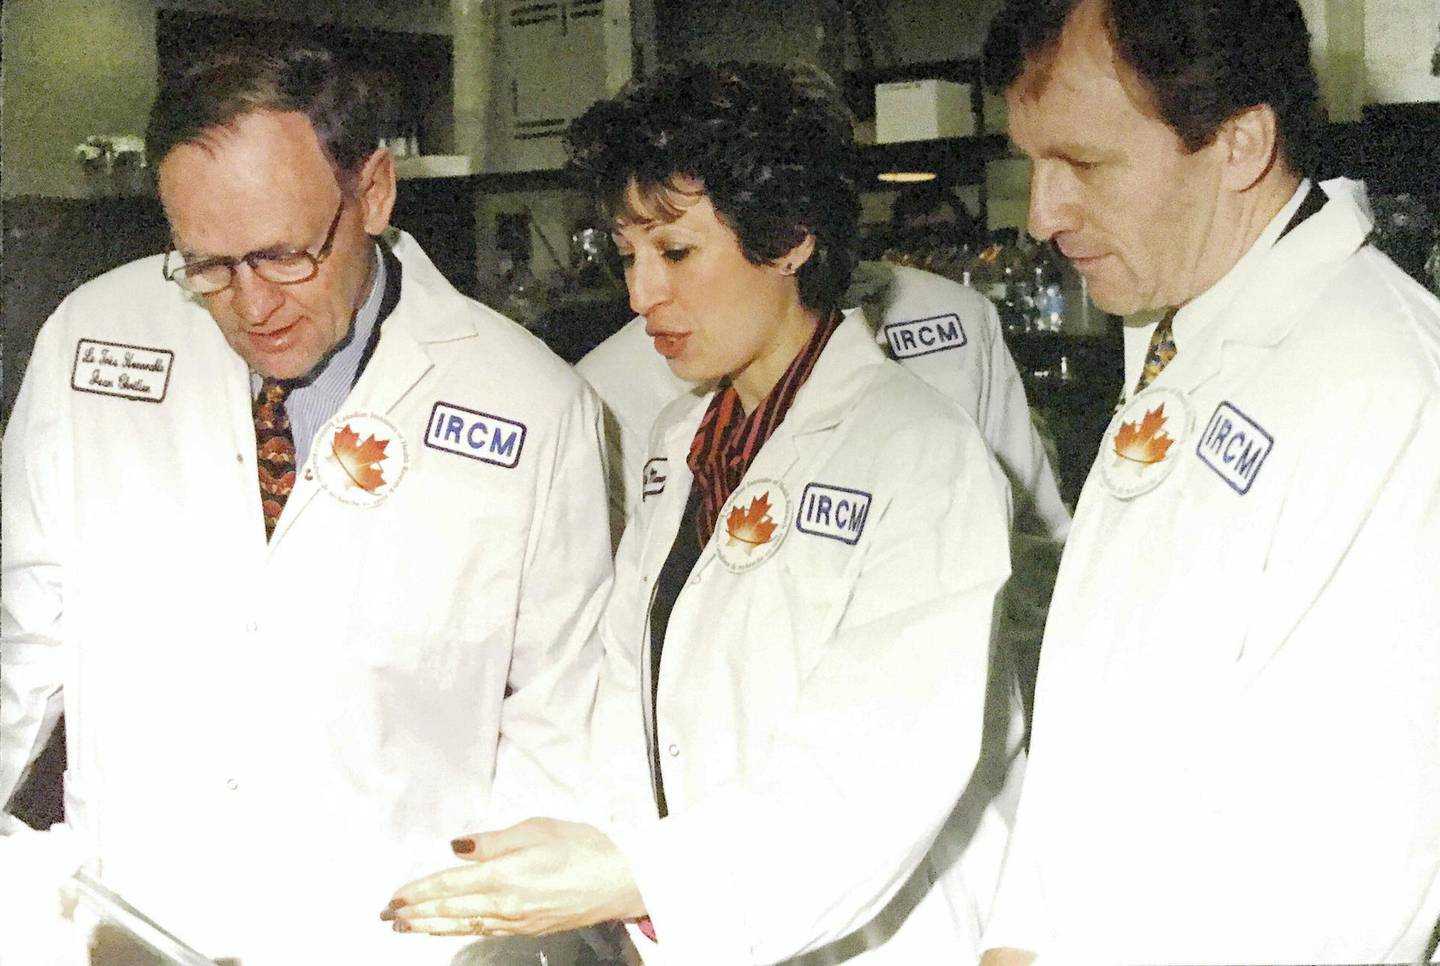 Dr Nemer at the Clinical Research Institute in Montreal in the late 1990s with the then Canadian Prime Minister Jean Chretien and Health Minister Allan Rock.